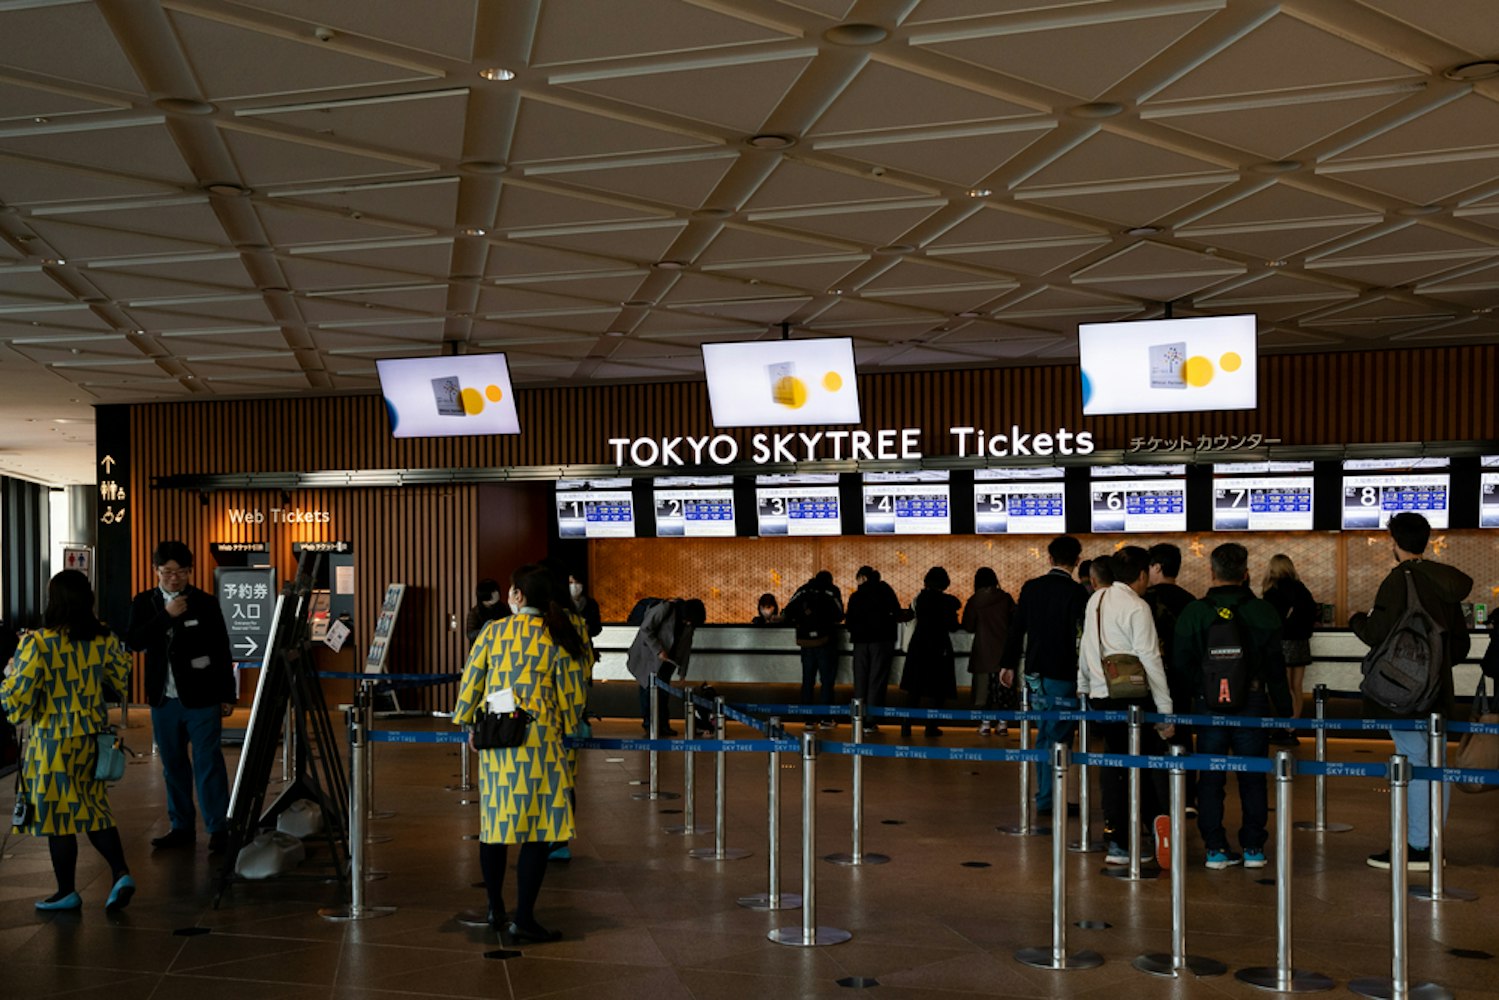 Tokyo Skytree Ticket Booths